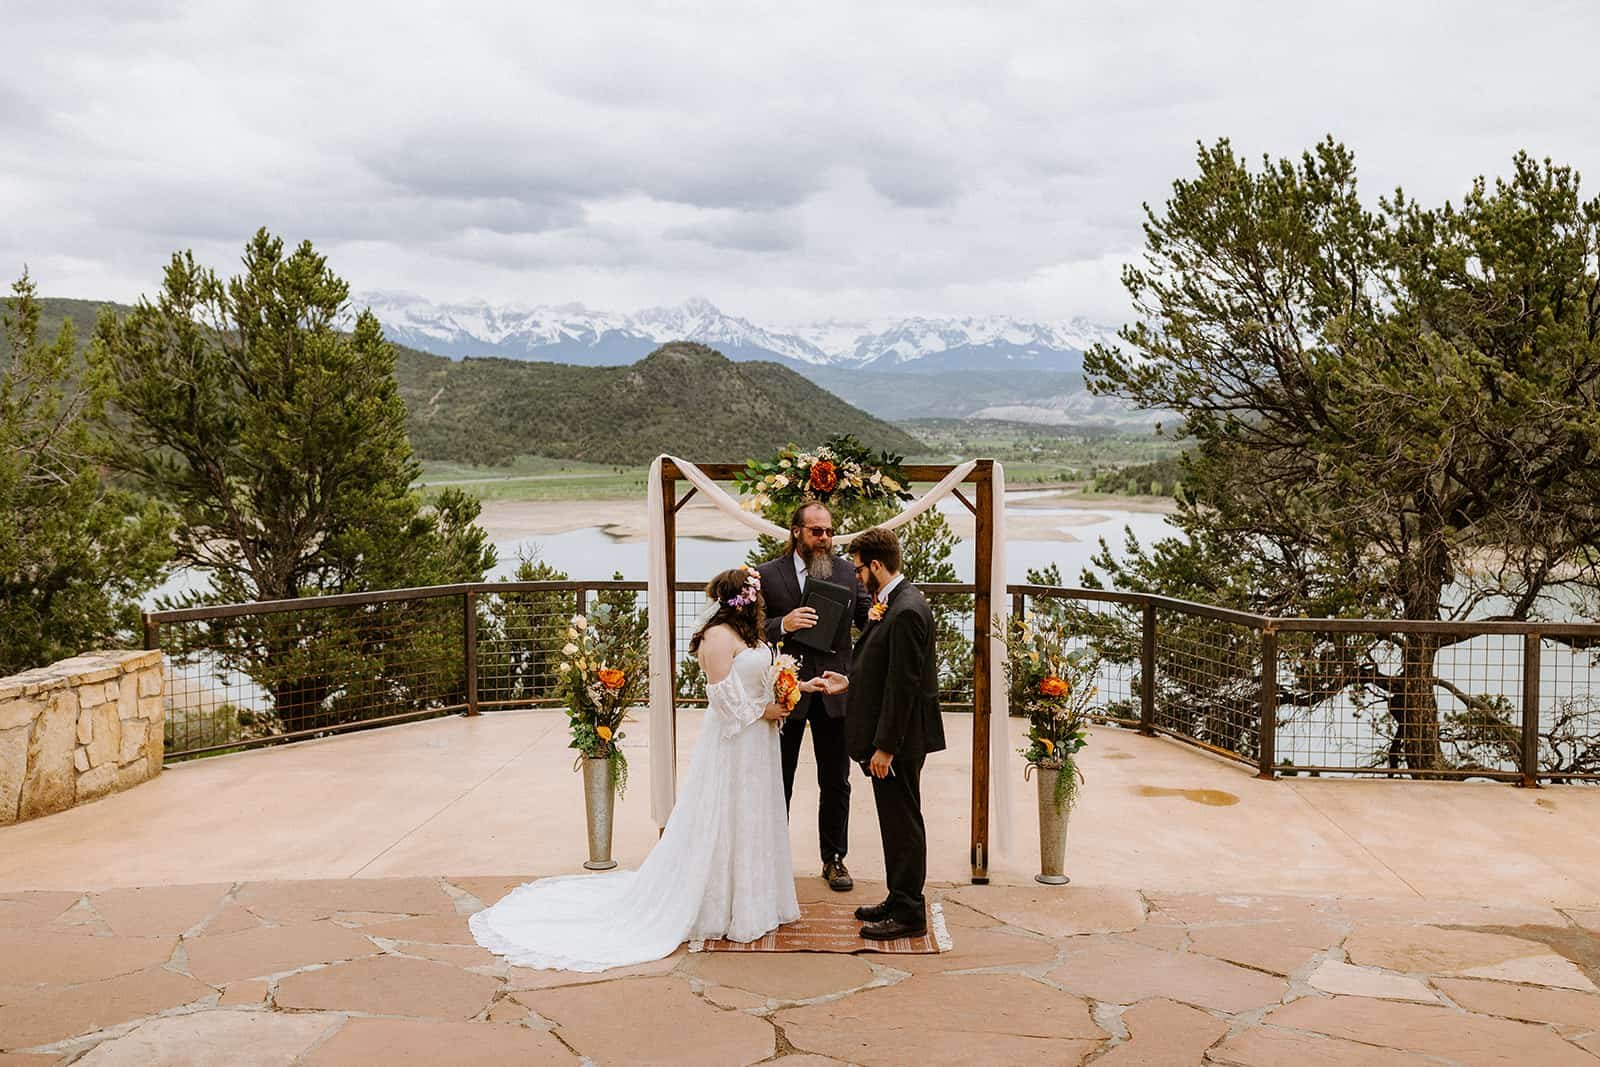 A man and woman stand in front of an arch at Ridgway State Park and the San Juan mountains in the background to get married